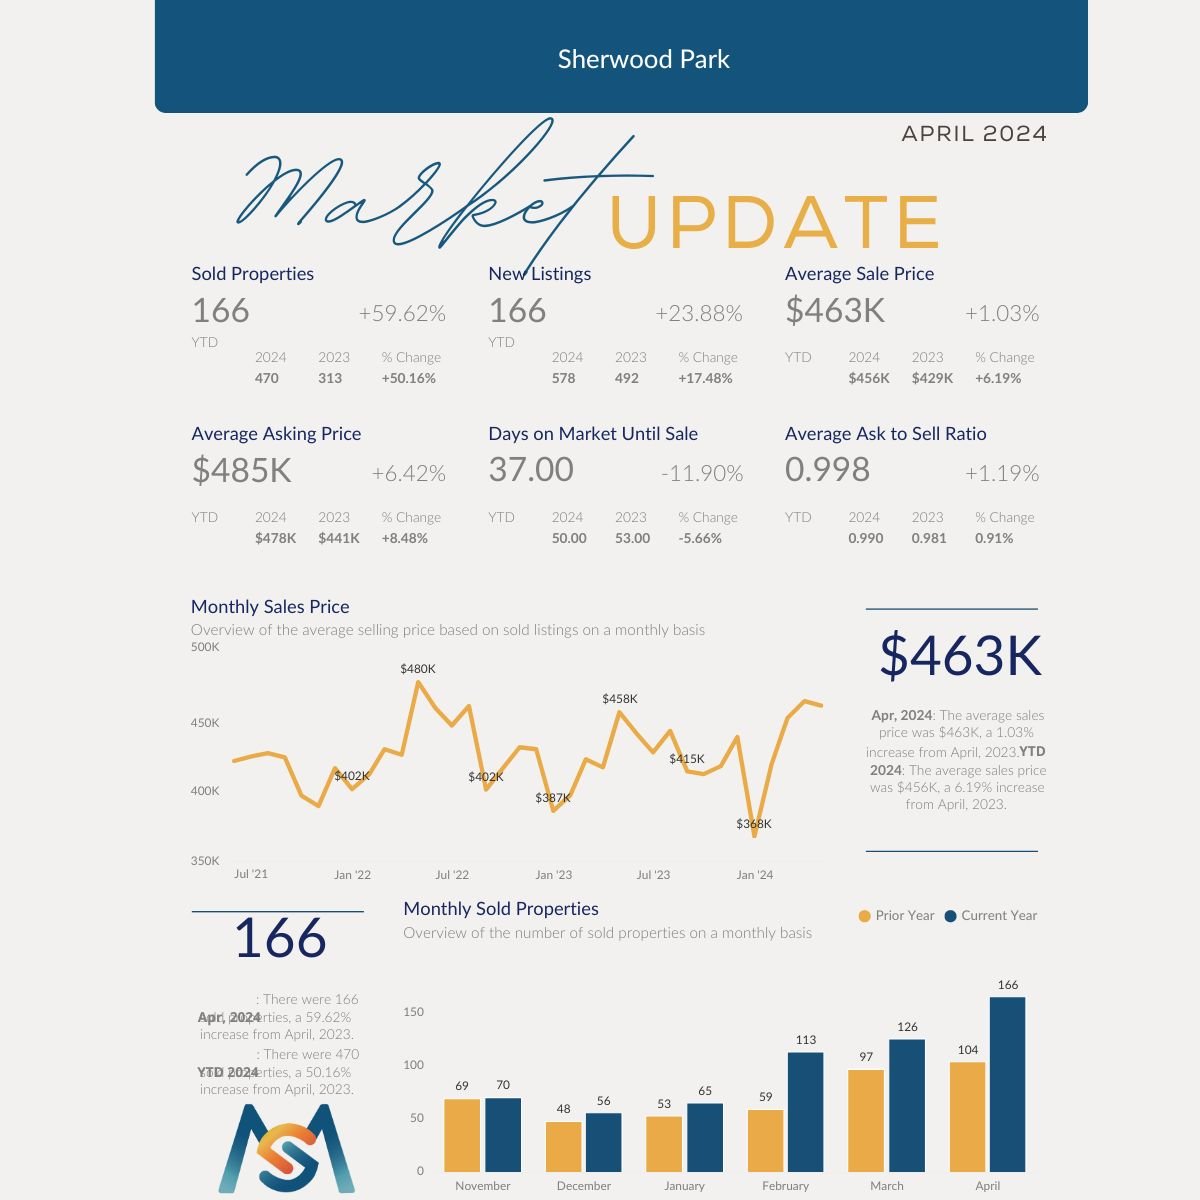 🏡 April Sherwood Park market stats are out! If you or someone you know is looking to buy or sell a property, please contact us.

The Smitty &amp; Mac Team
Royal LePage Prestige Realty
📲 (780) 777-6544

#sherwoodpark #realtor #marketstats